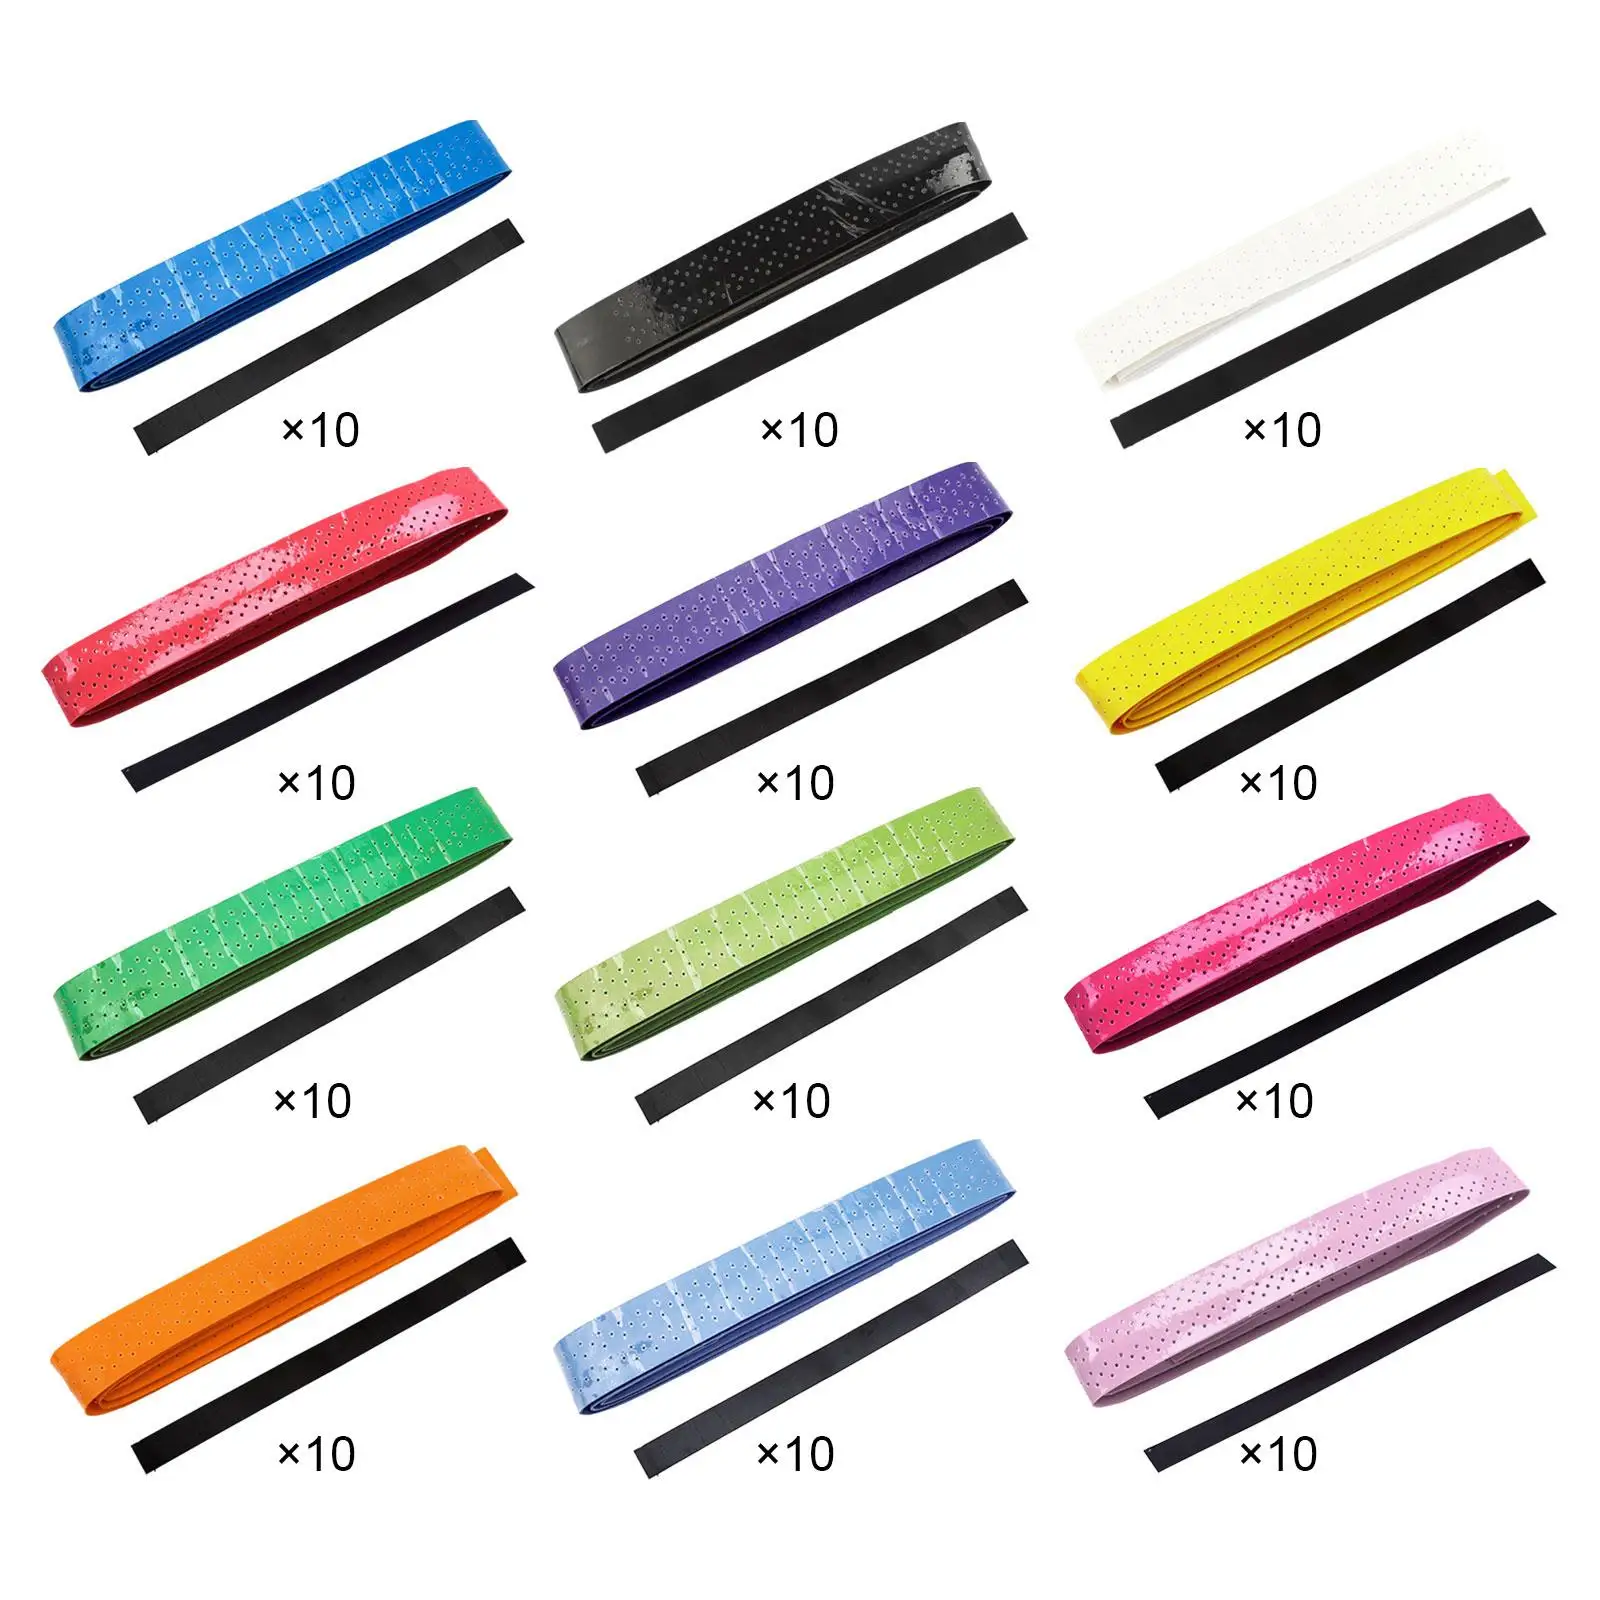 10 Pieces Racket Grip Tape Non Slip Portable Band Sweat Absorbing Tennis Overgrip for Fishing Rod Squash Rackets Baseball Bats